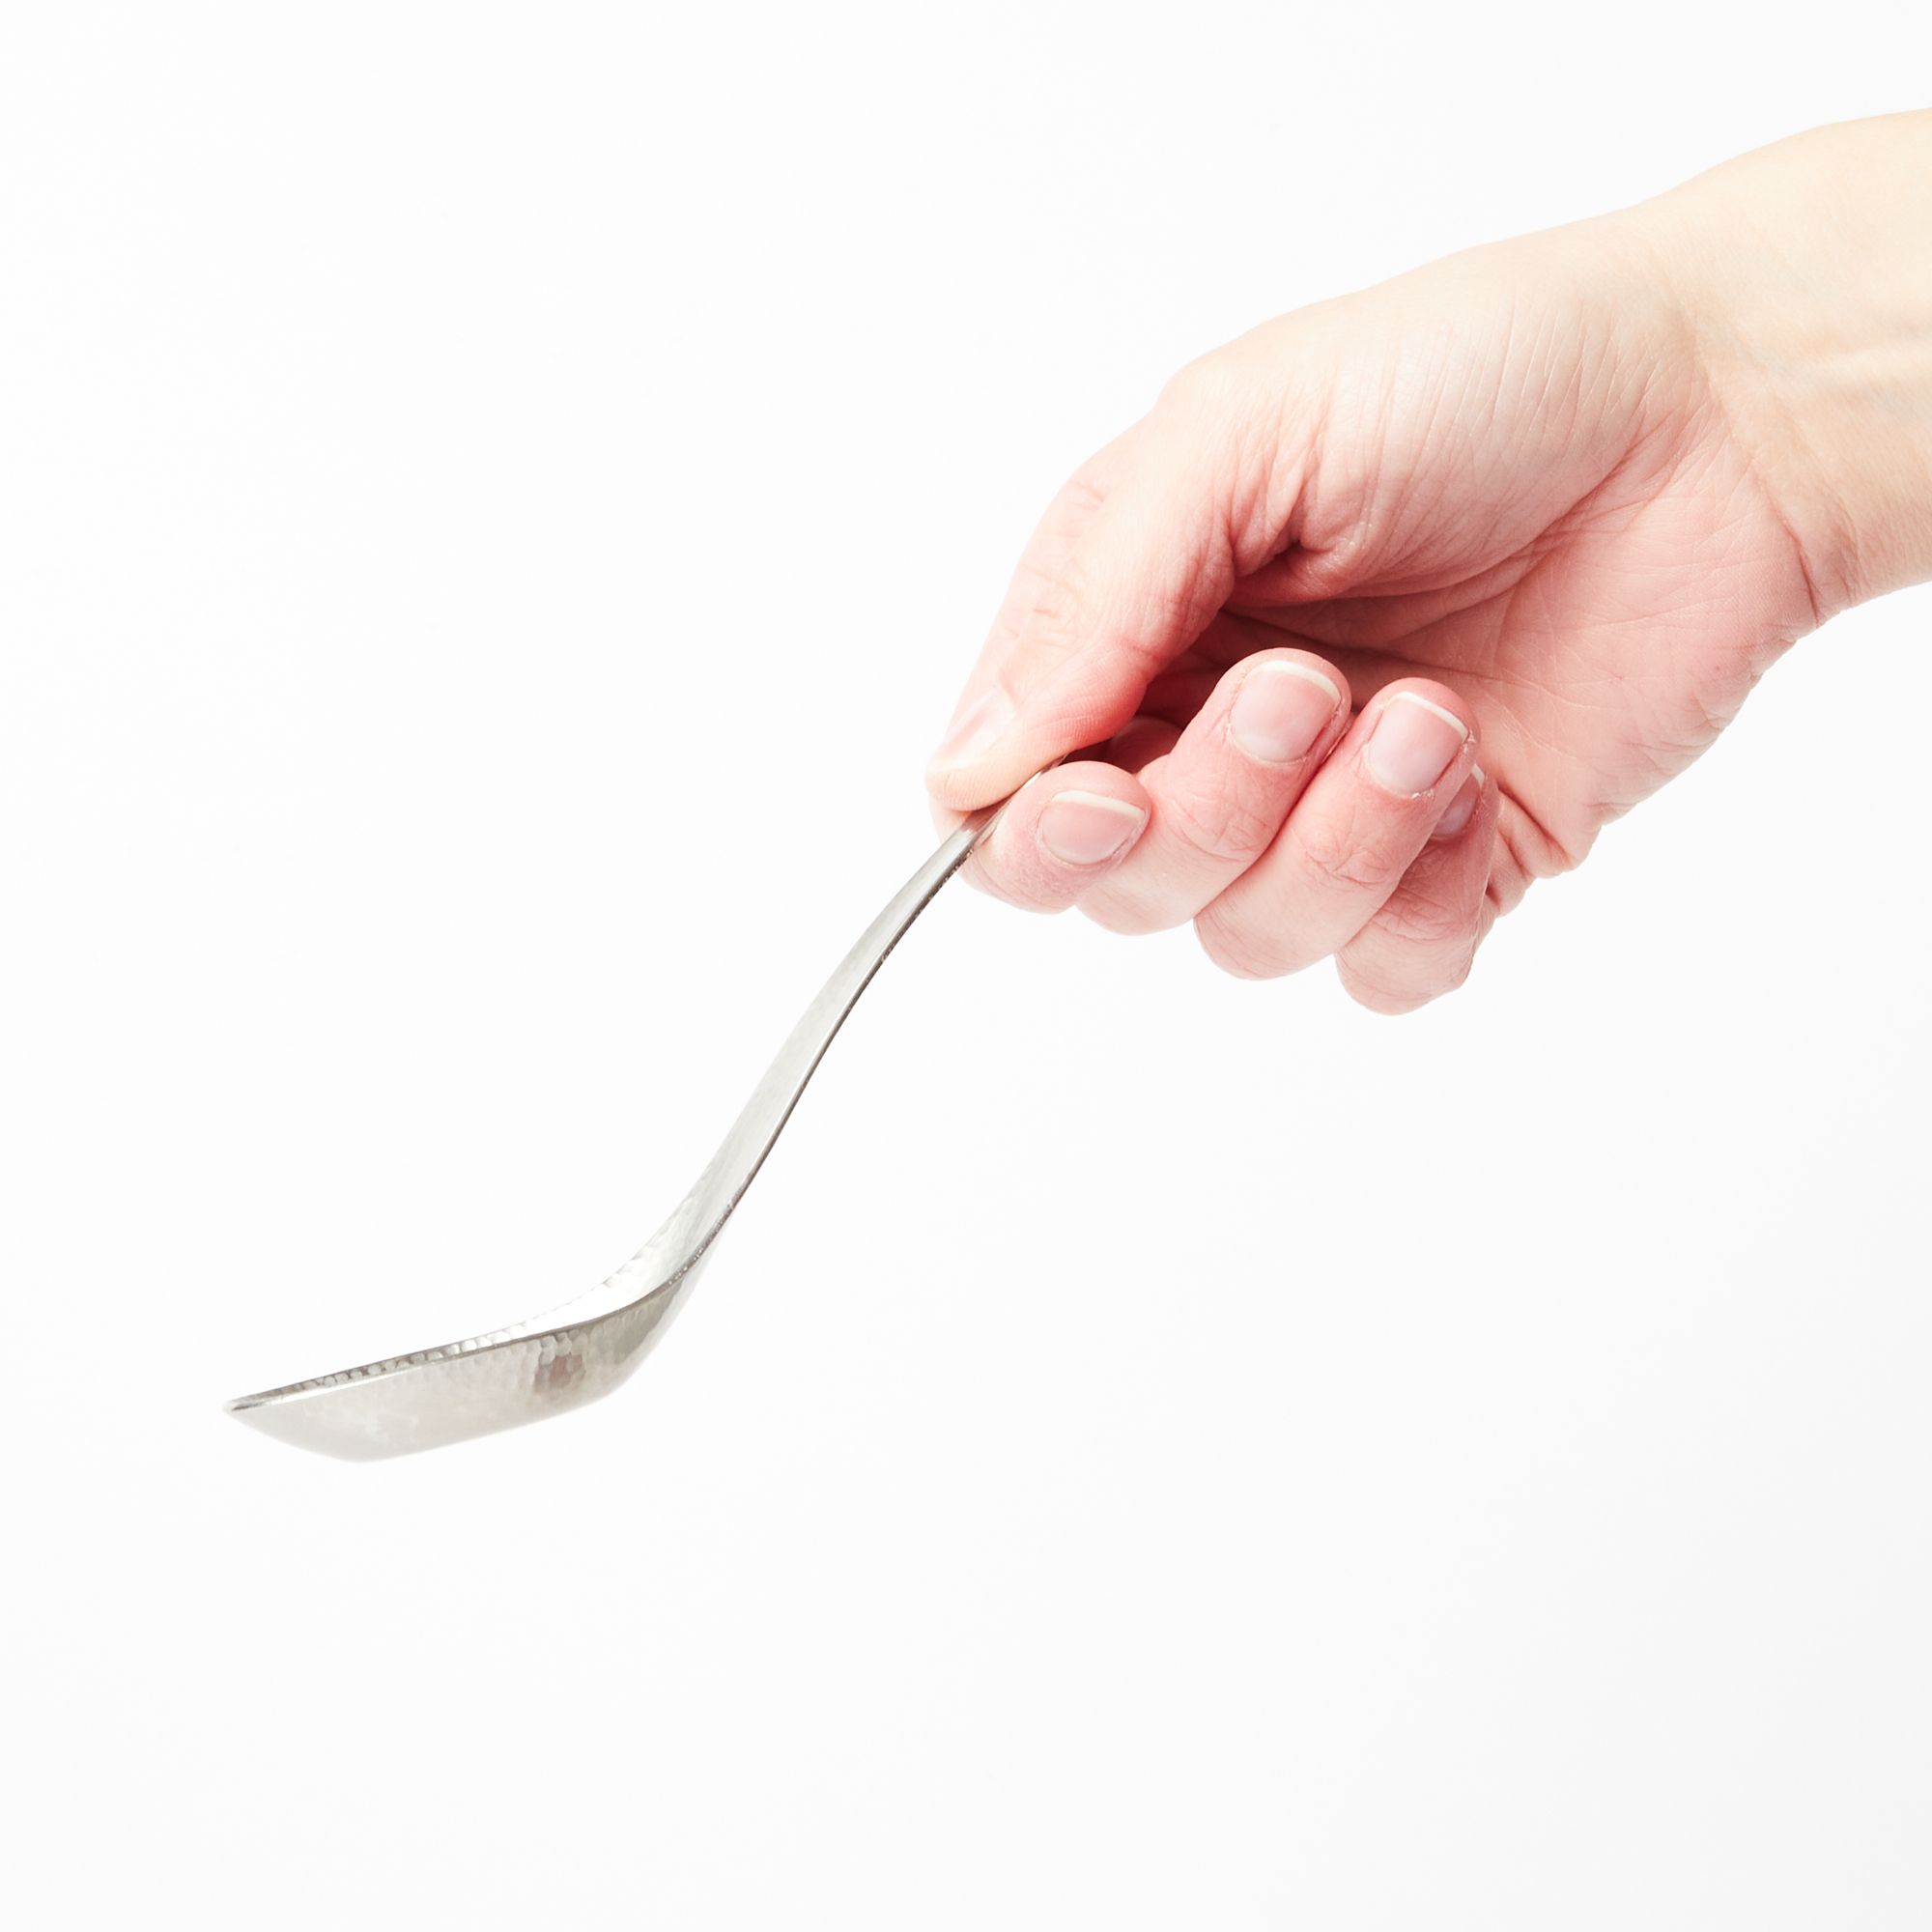 A hand holding a steel Asian soup spoon with hammered finish